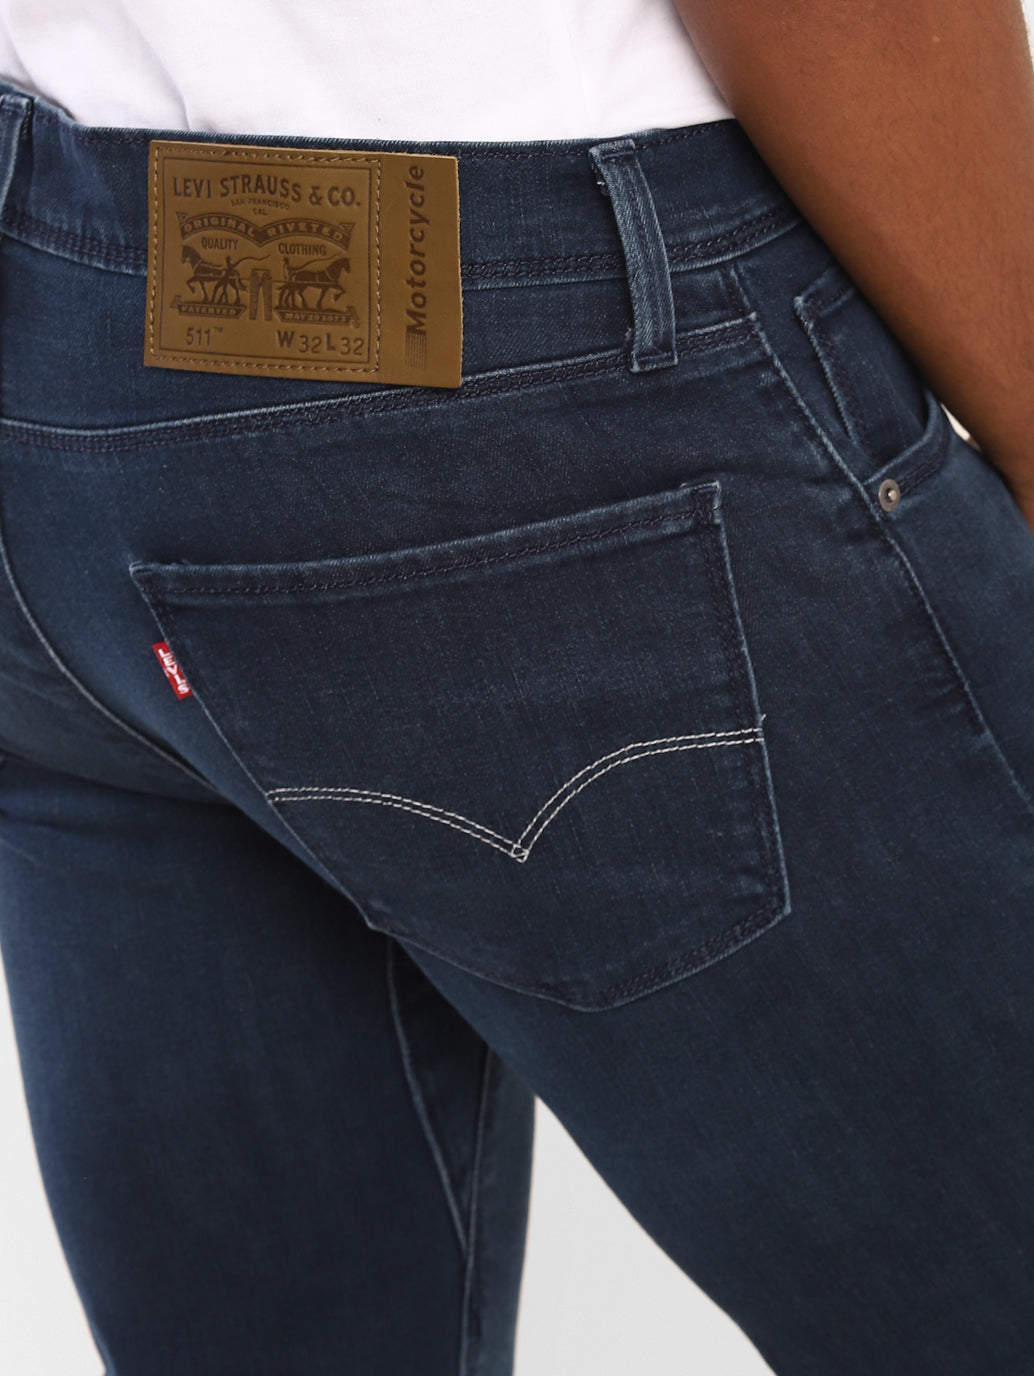 Crafted Jeans from the Levi's Motorcycle Collection